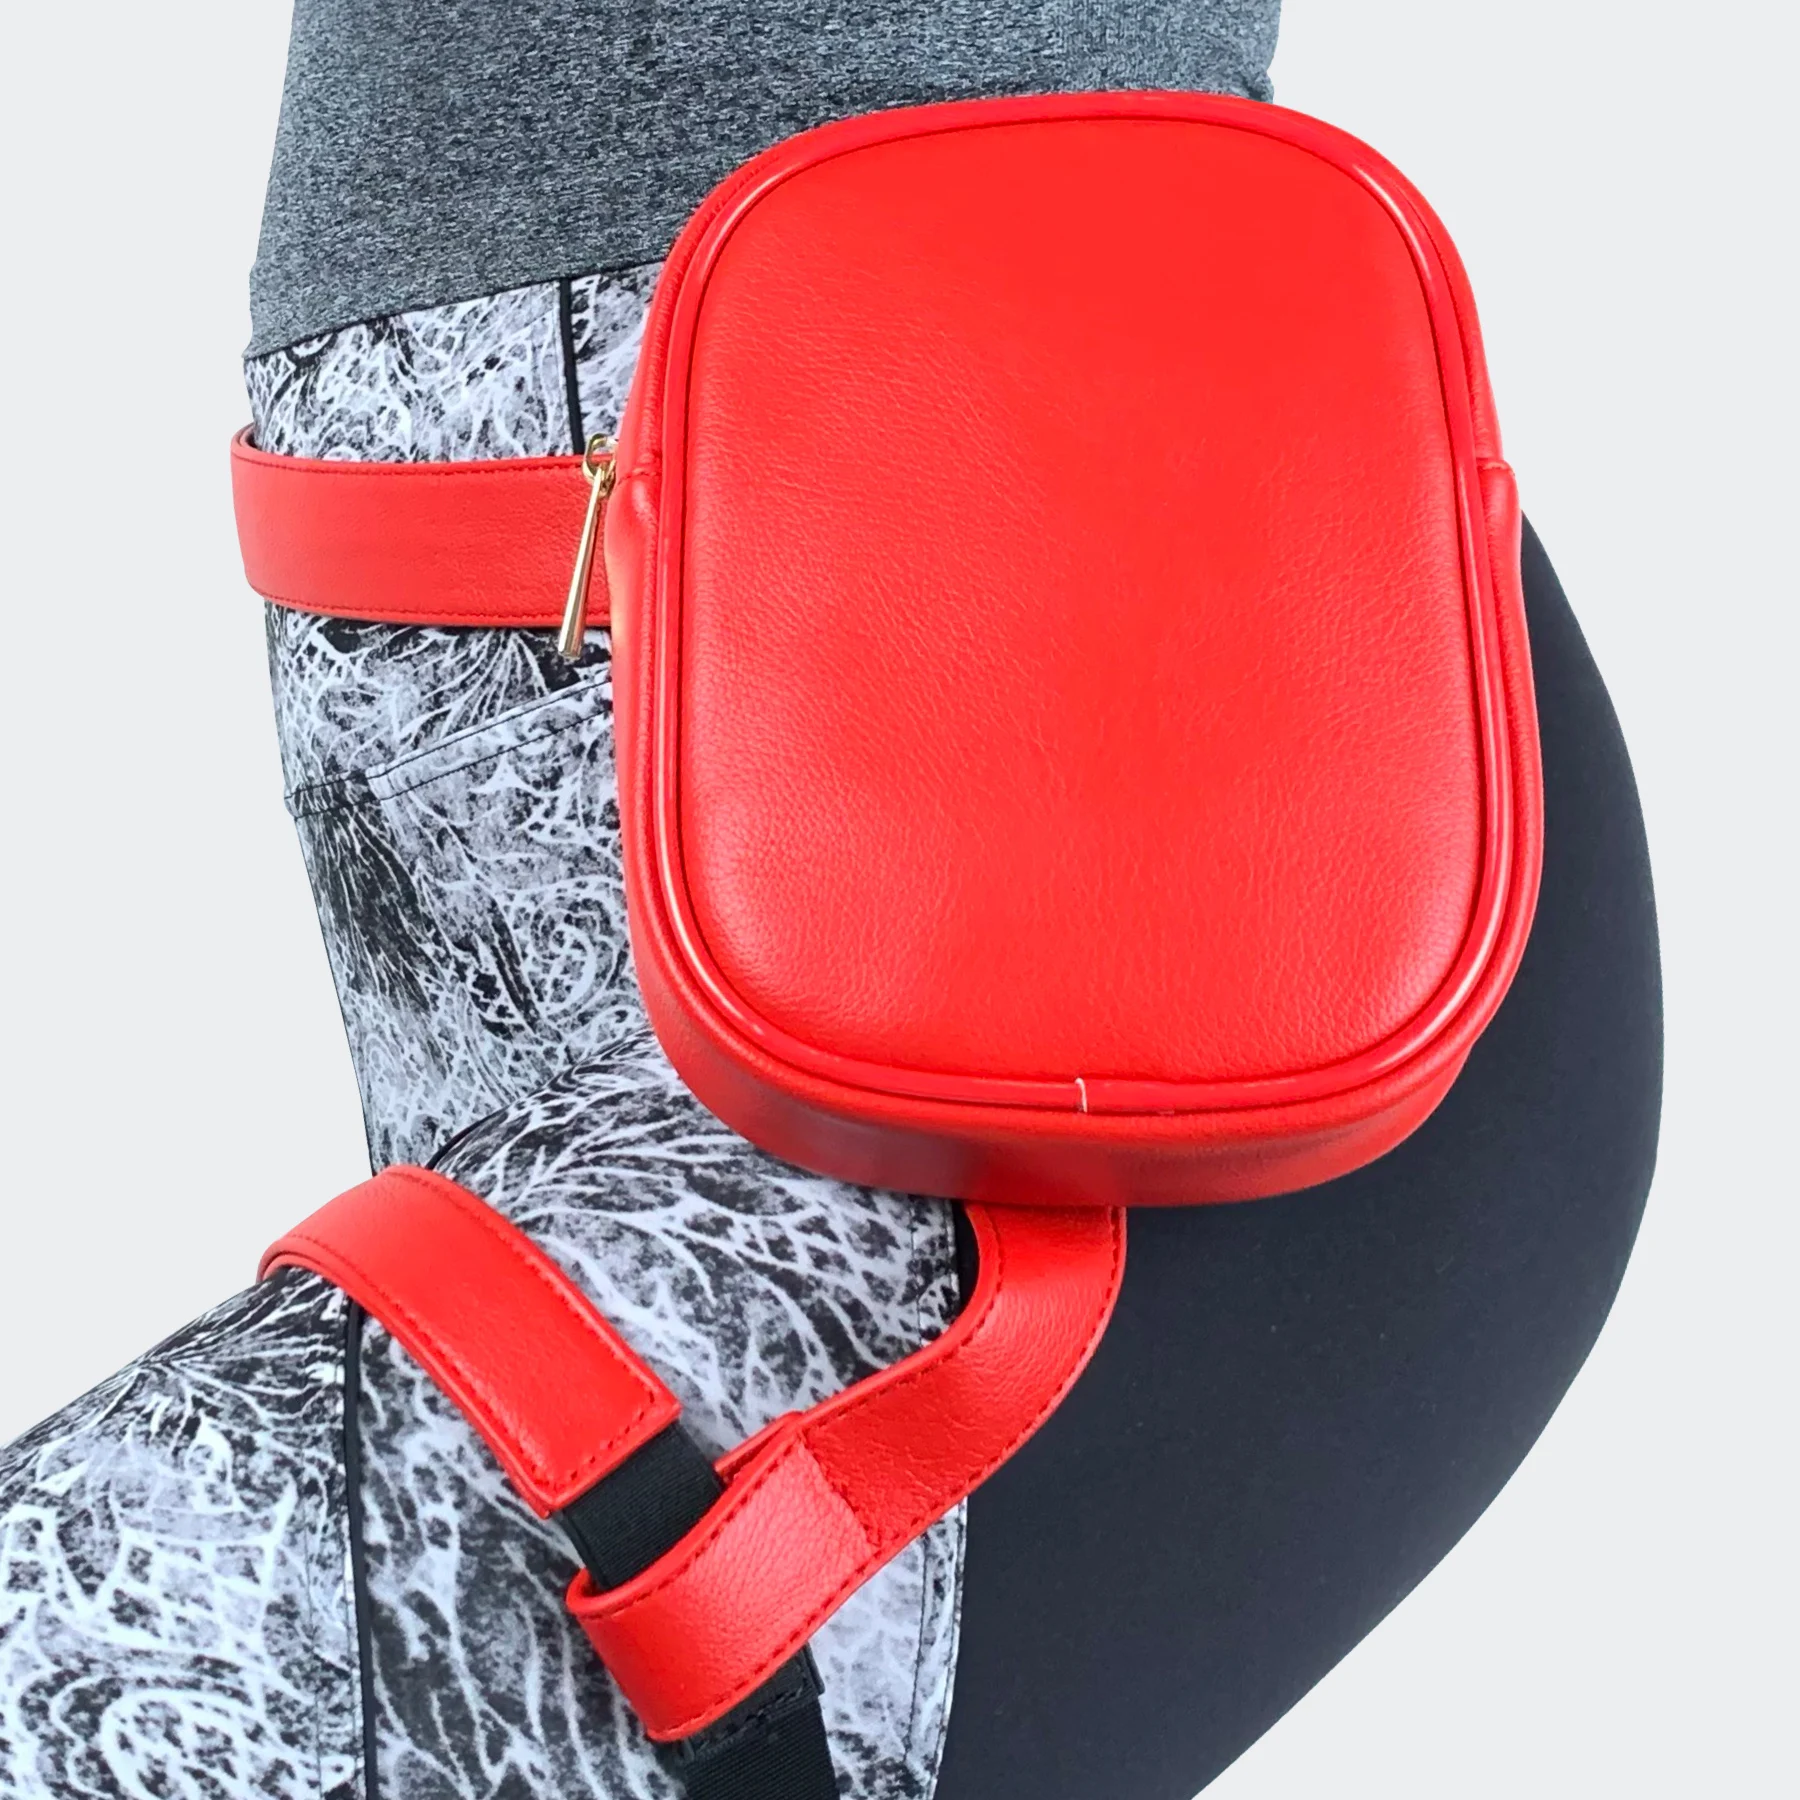 

Leather Fanny Pack Fashion Women Waist Thigh Ladies Laser Holographic Fasion Bags Leg Harness Bag, Red and black